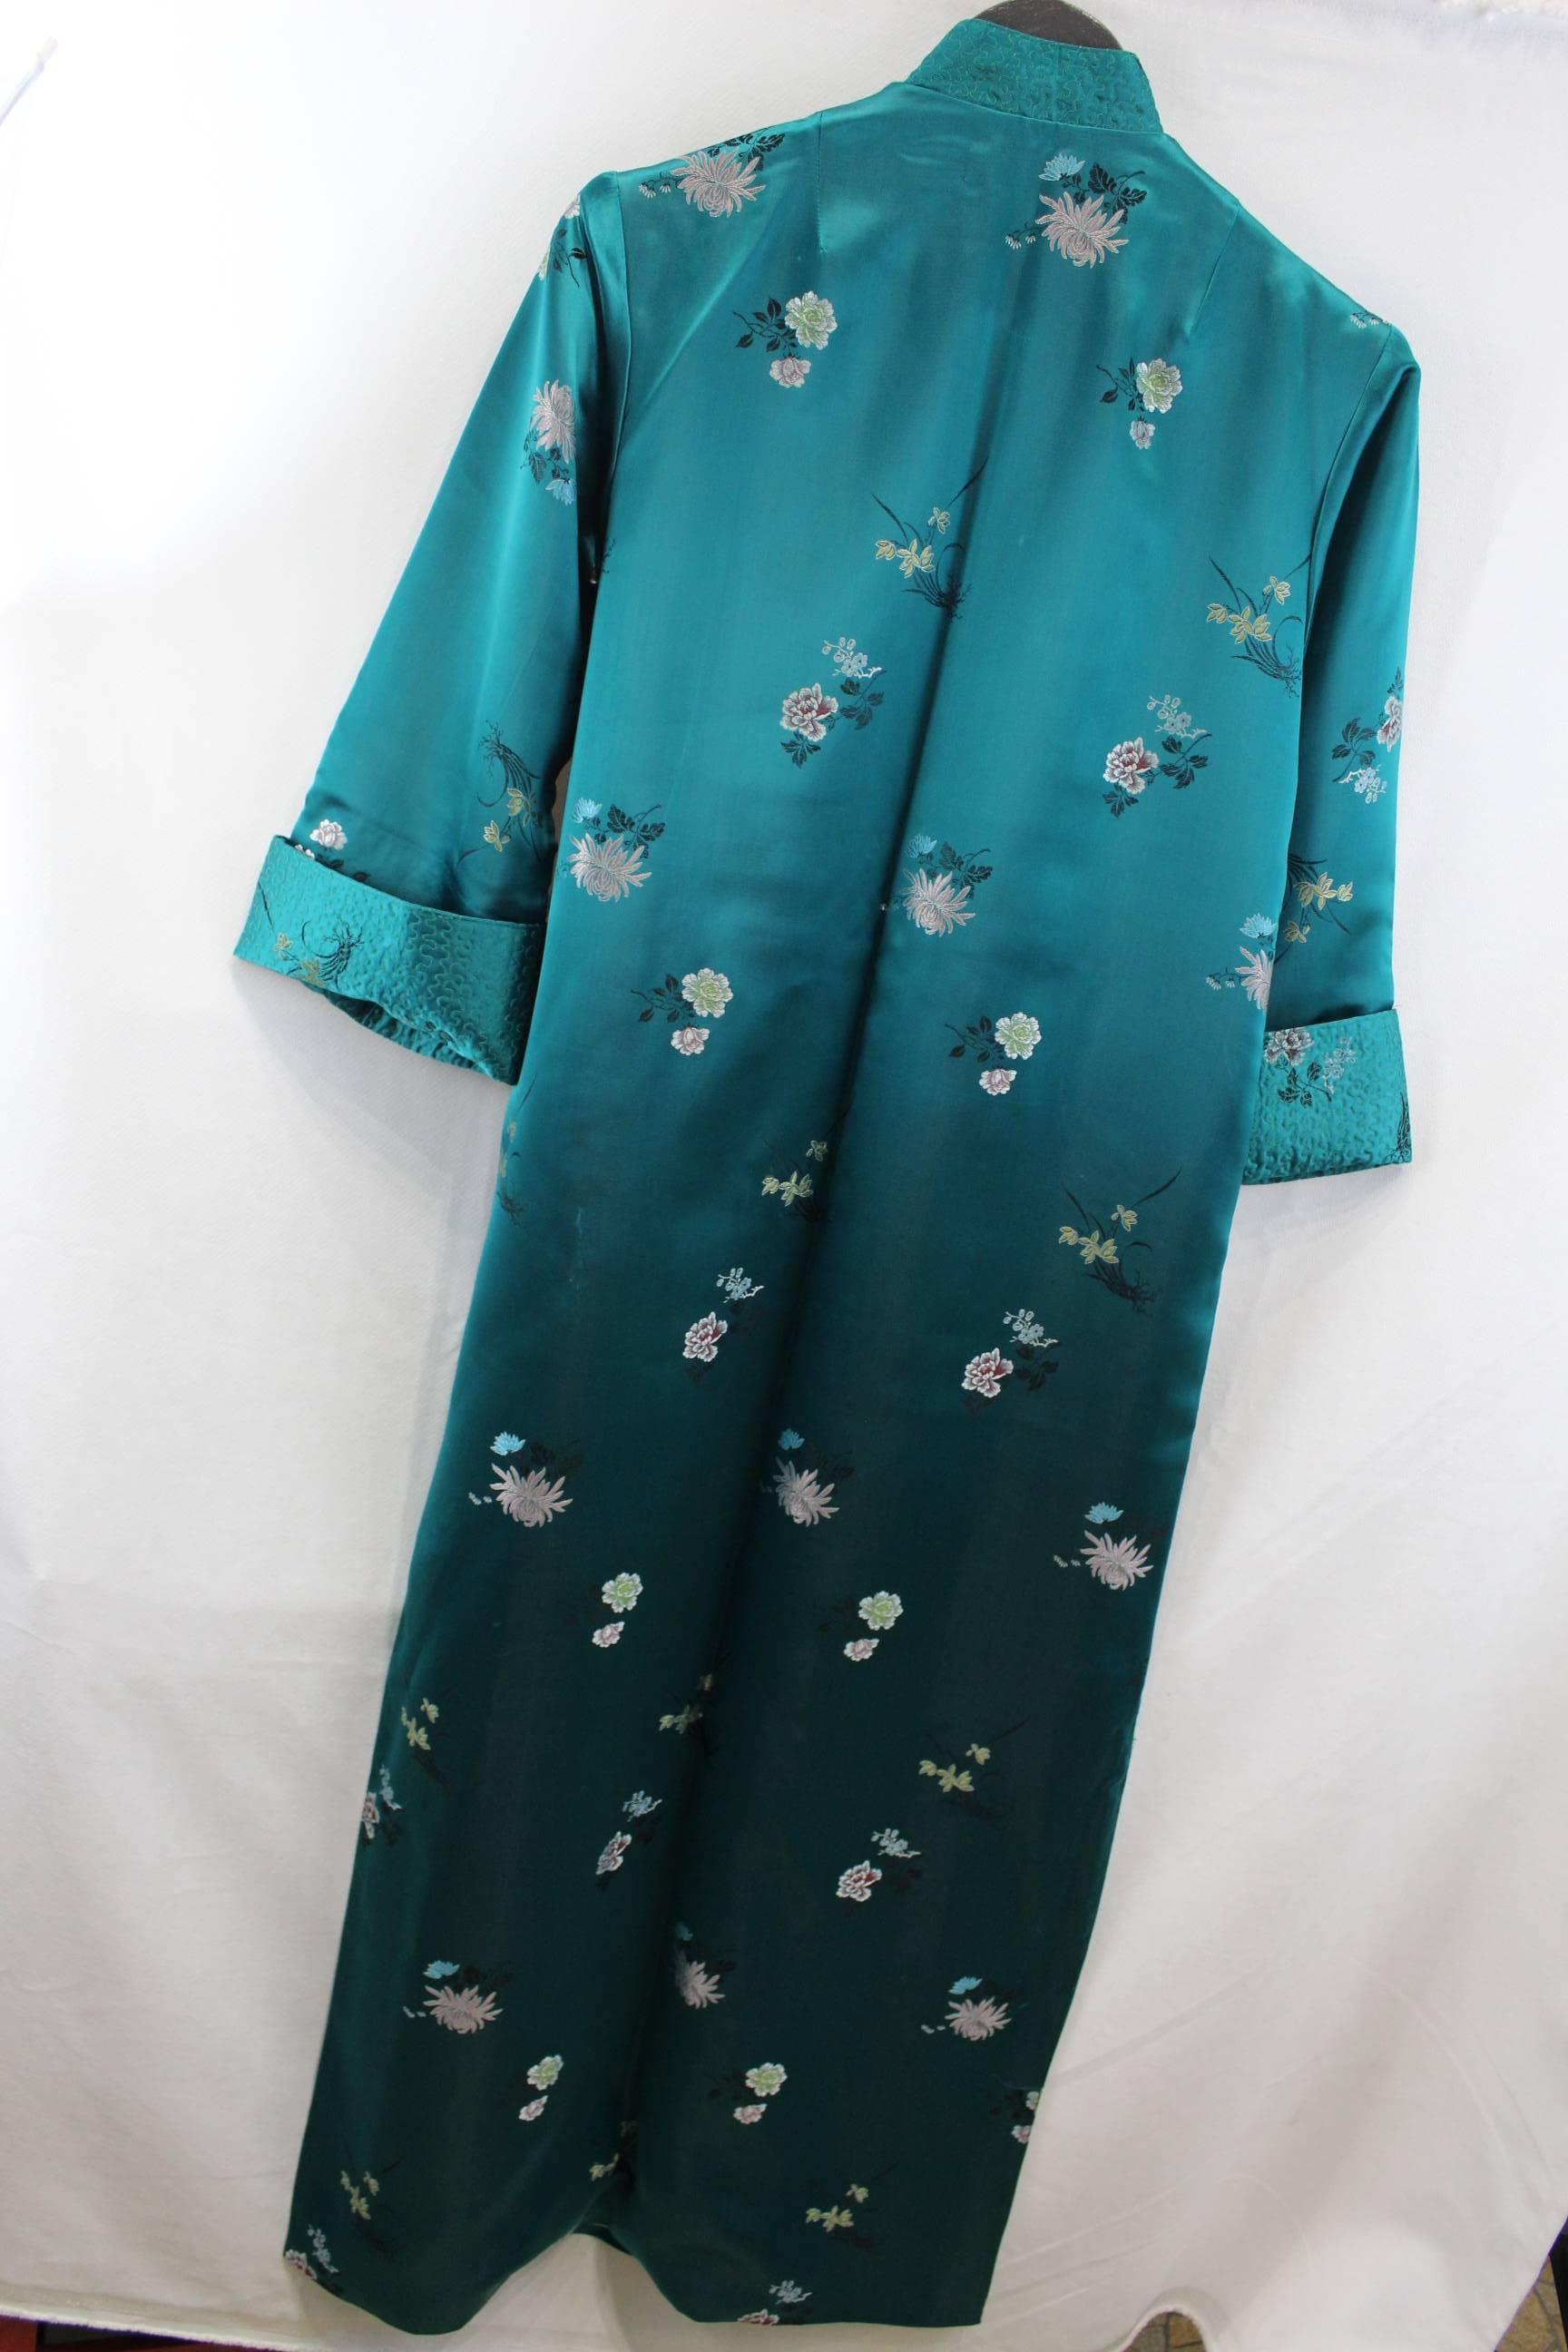 Really nice Vintage piece. Silk Kimono from 1964 (This was bought during a trip for the summer olympic games in Tokio)

Green Silk Kimono with floral designs. Really good external condition.

Some shades in the interior silk  lining due to a bad